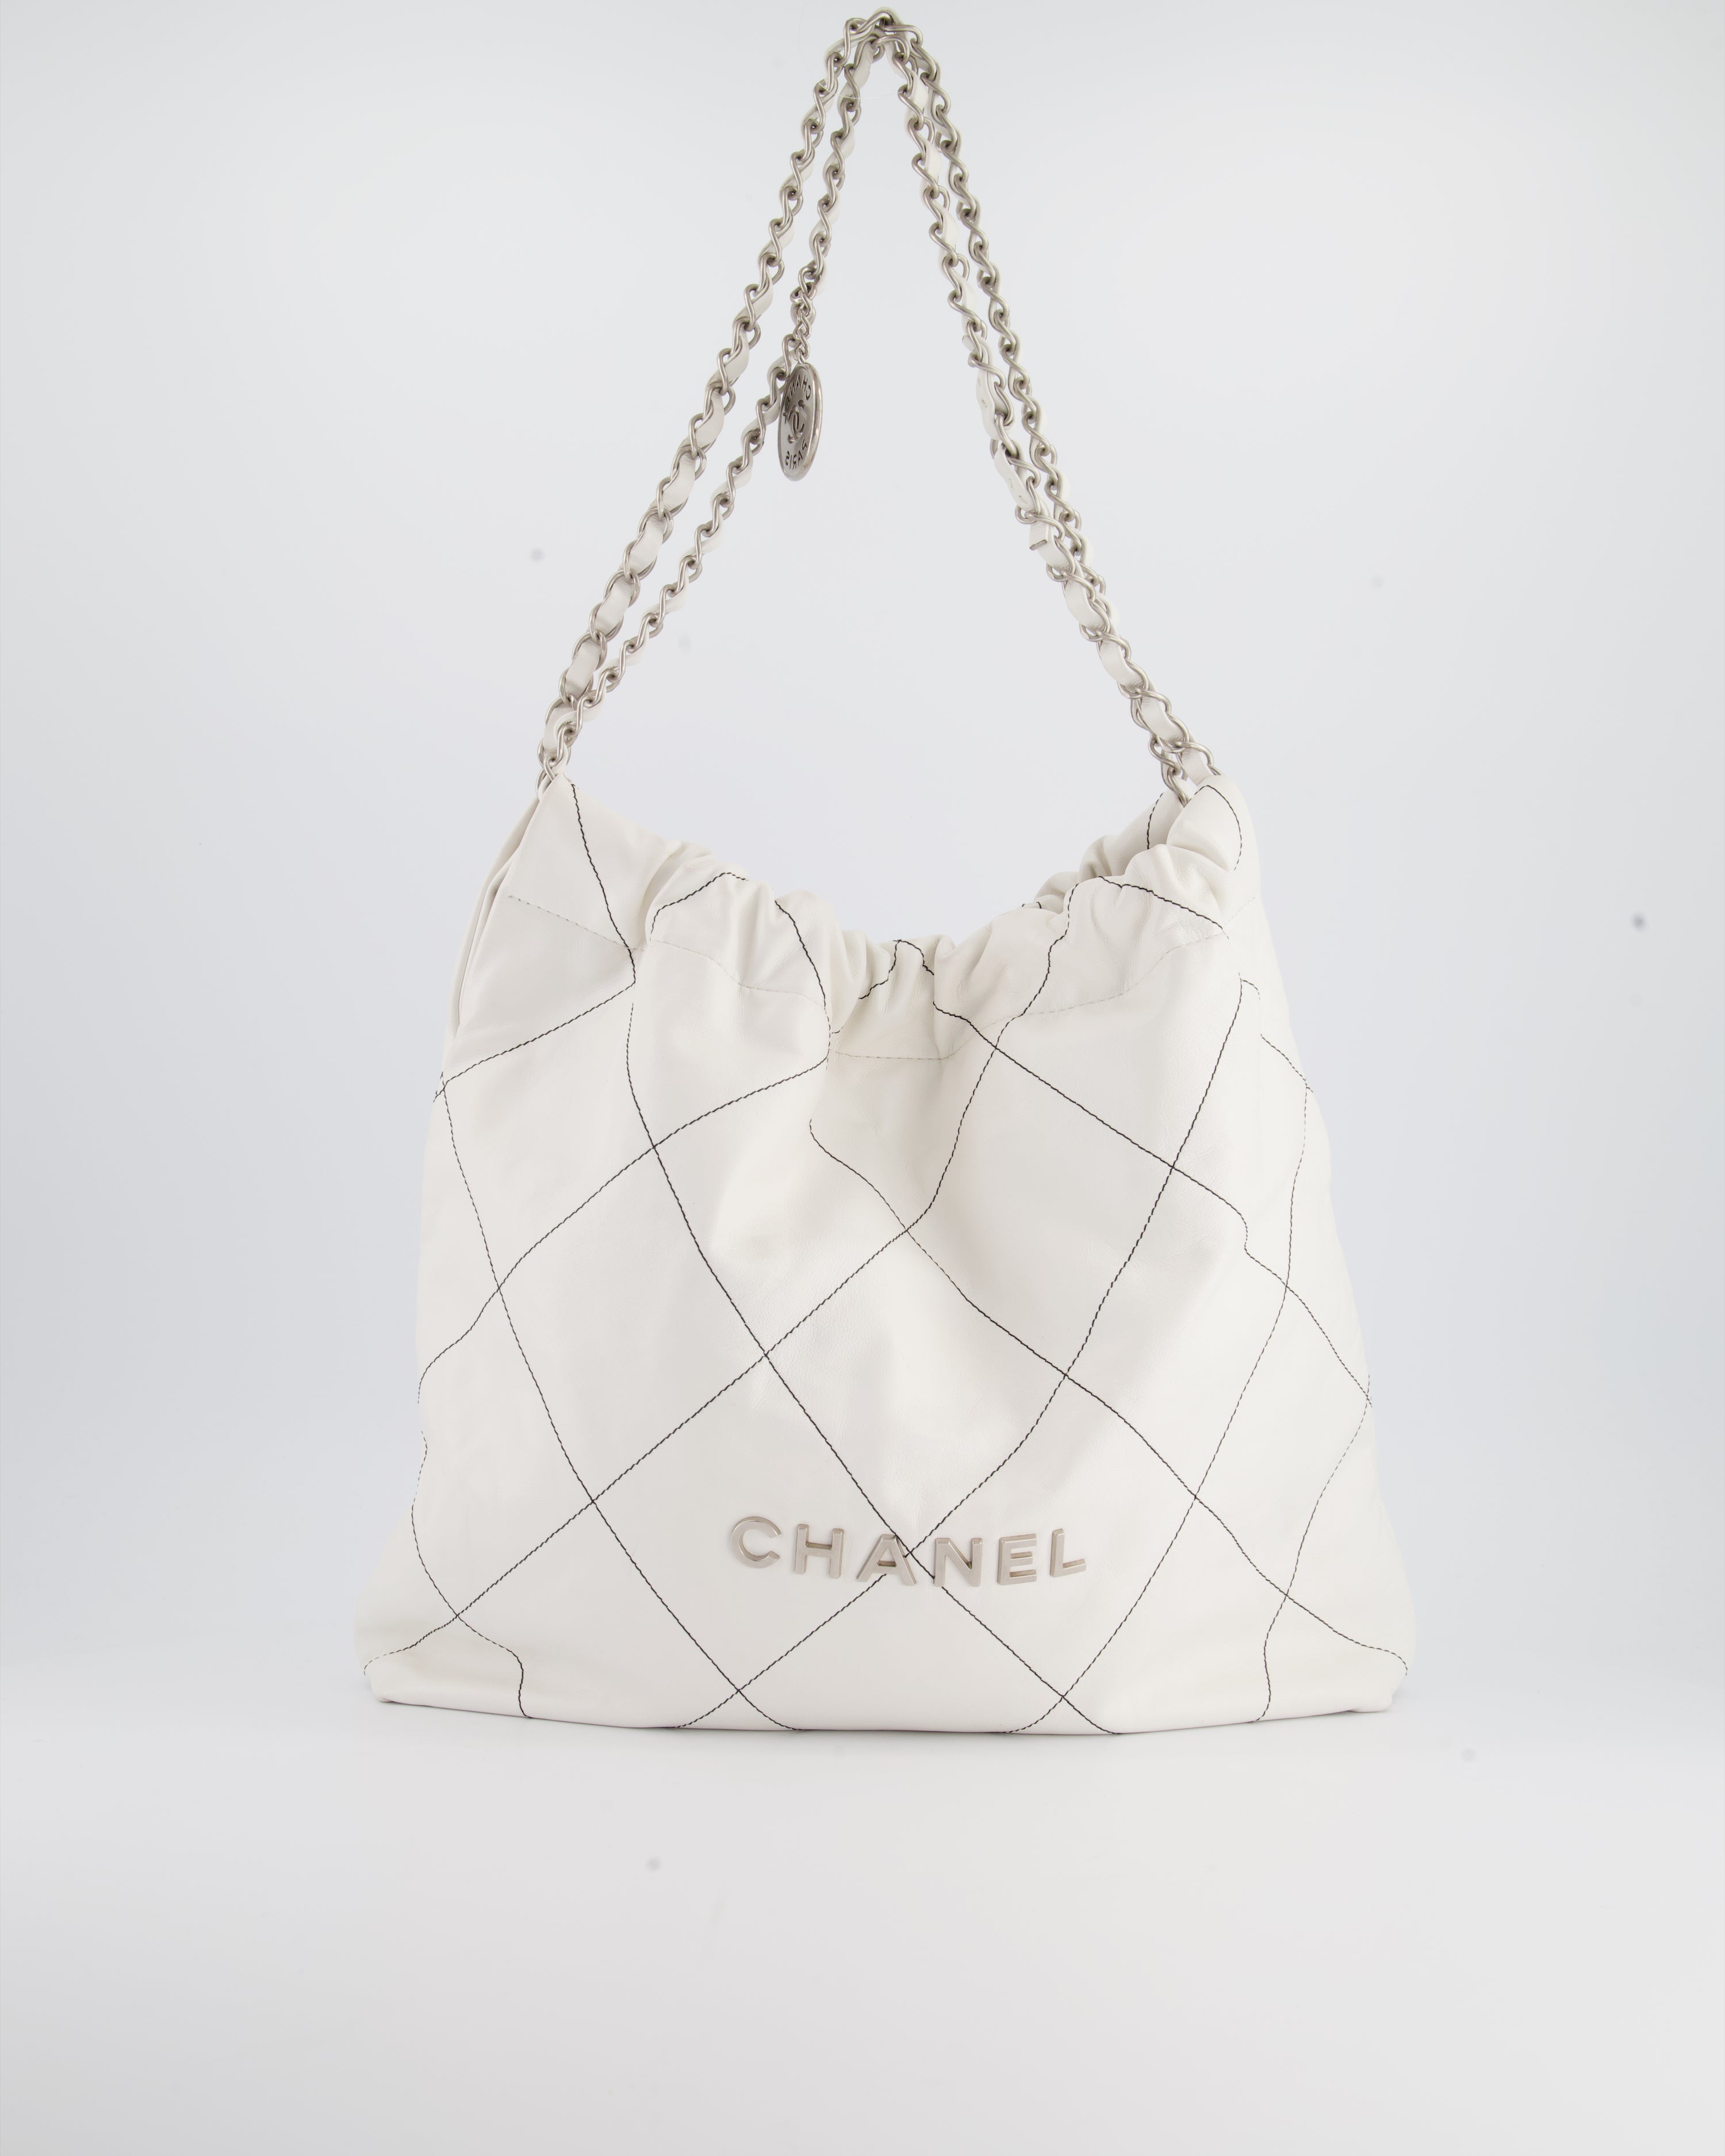 Chanel 22 Bag in White Aged Calfskin with Silver Hardware and